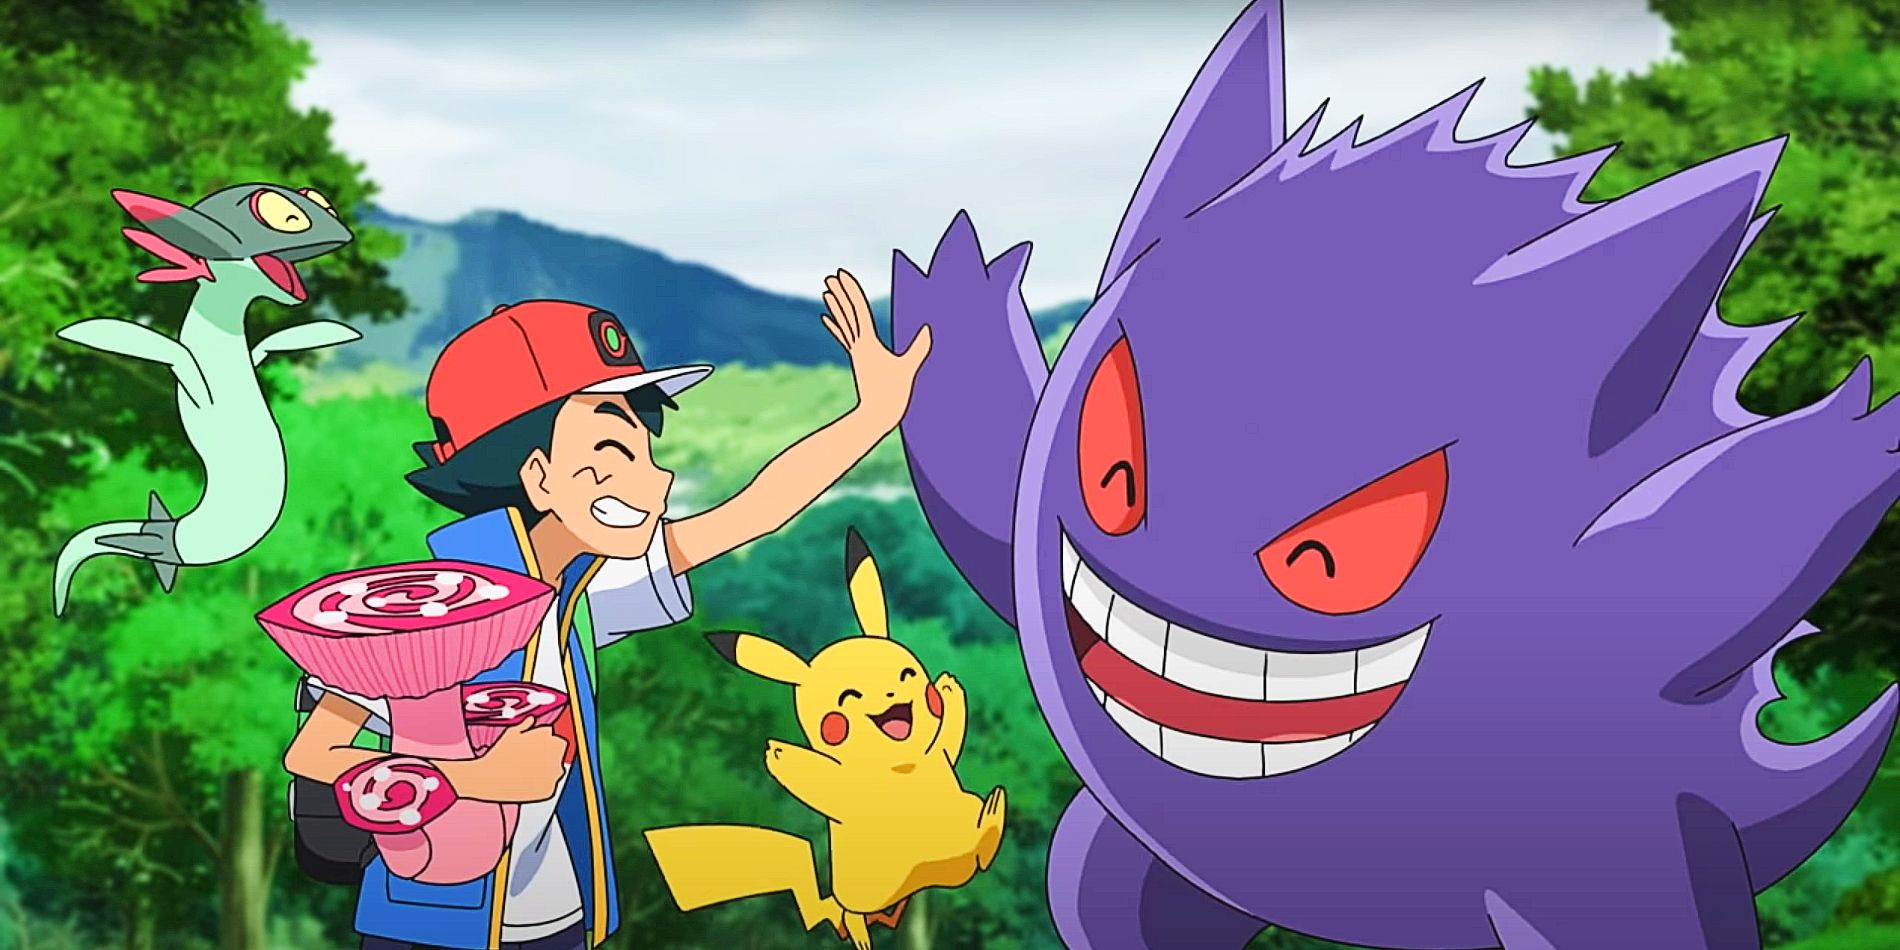 Pokémon Ultimate Journeys Show Releases On Netflix Later This Year